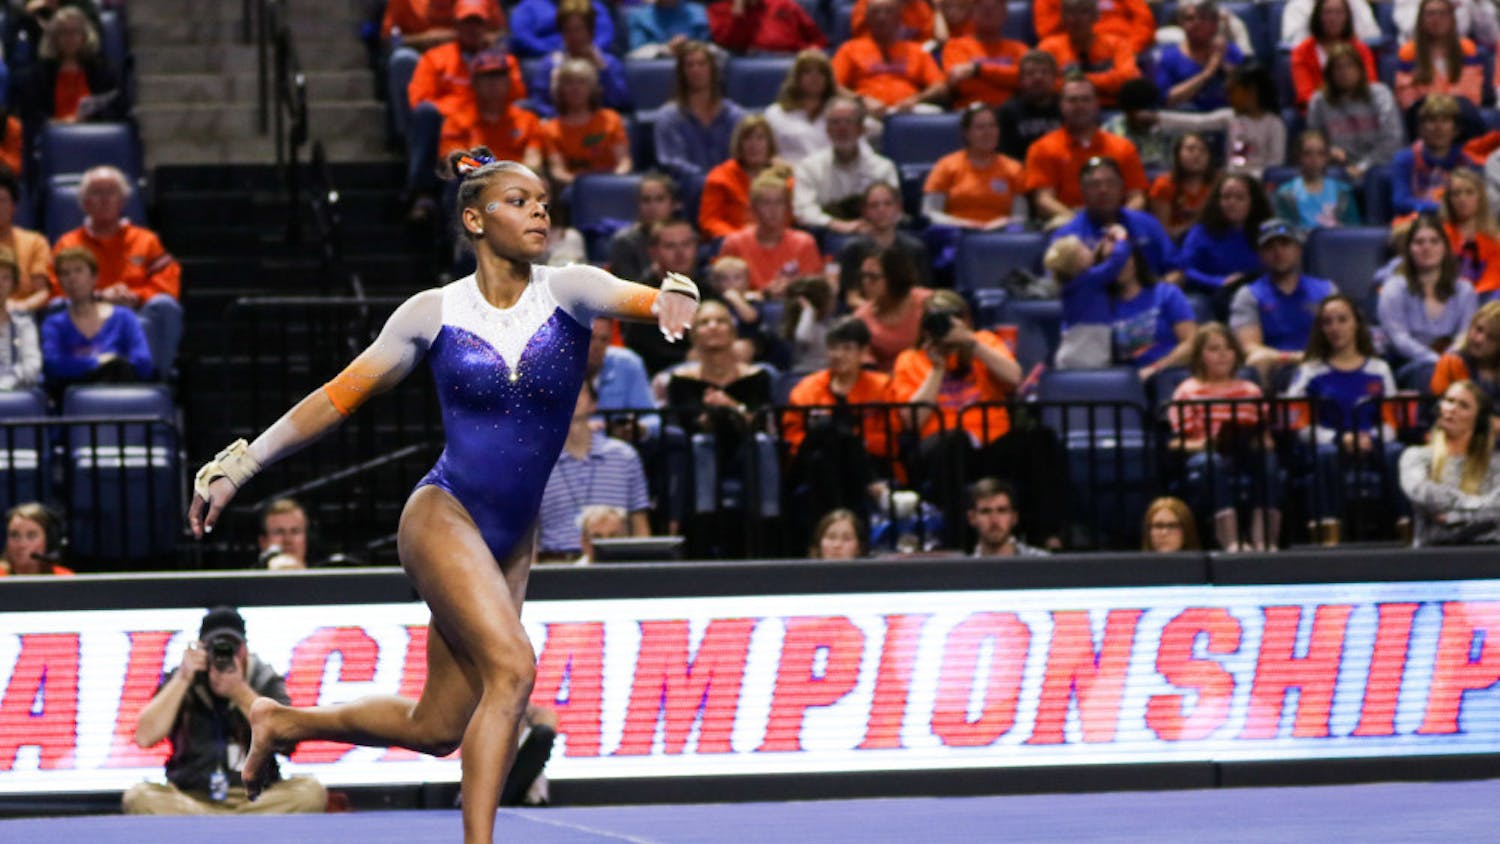 UF freshman Trinity Thomas won the vault title at the SEC Championships on Saturday in New Orleans.
&nbsp;